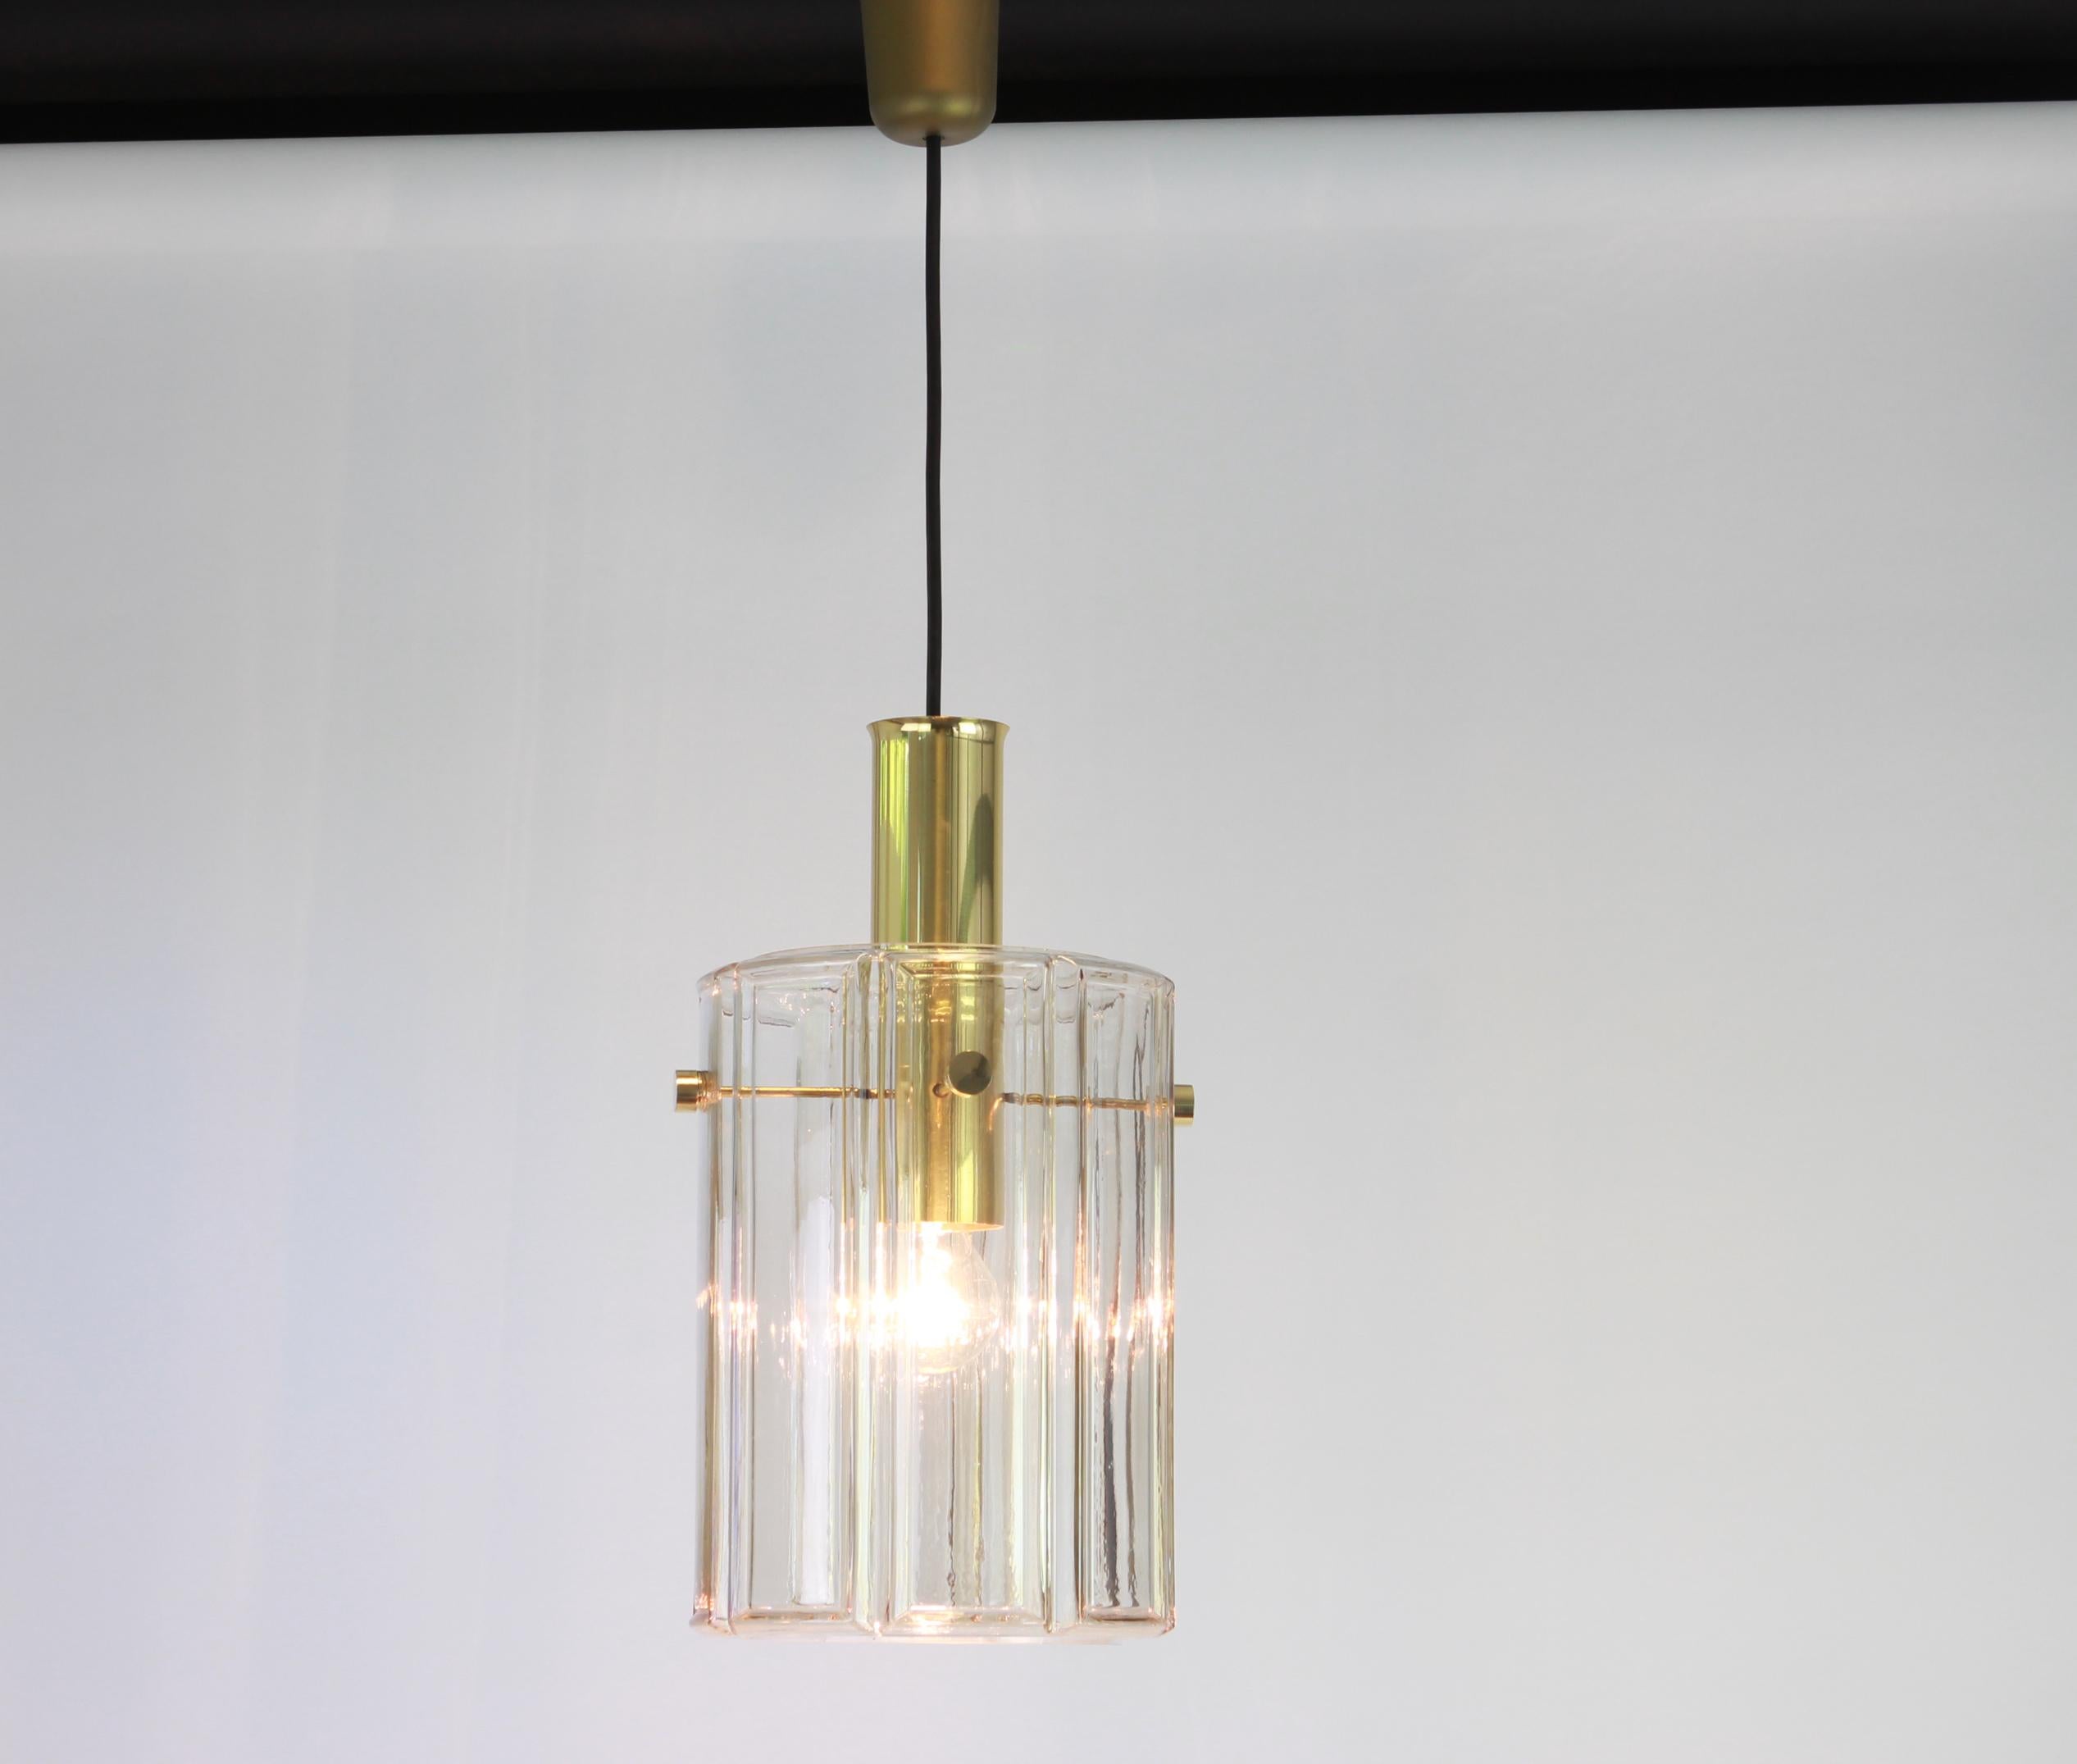 Brass pendant fixture with cylindrical glass shade design by Limburg, Germany, 1960s

Heavy quality and in very good condition. Cleaned, well-wired and ready to use. The fixture requires 1 x E27 Standard bulbs with 100W max each and function on a